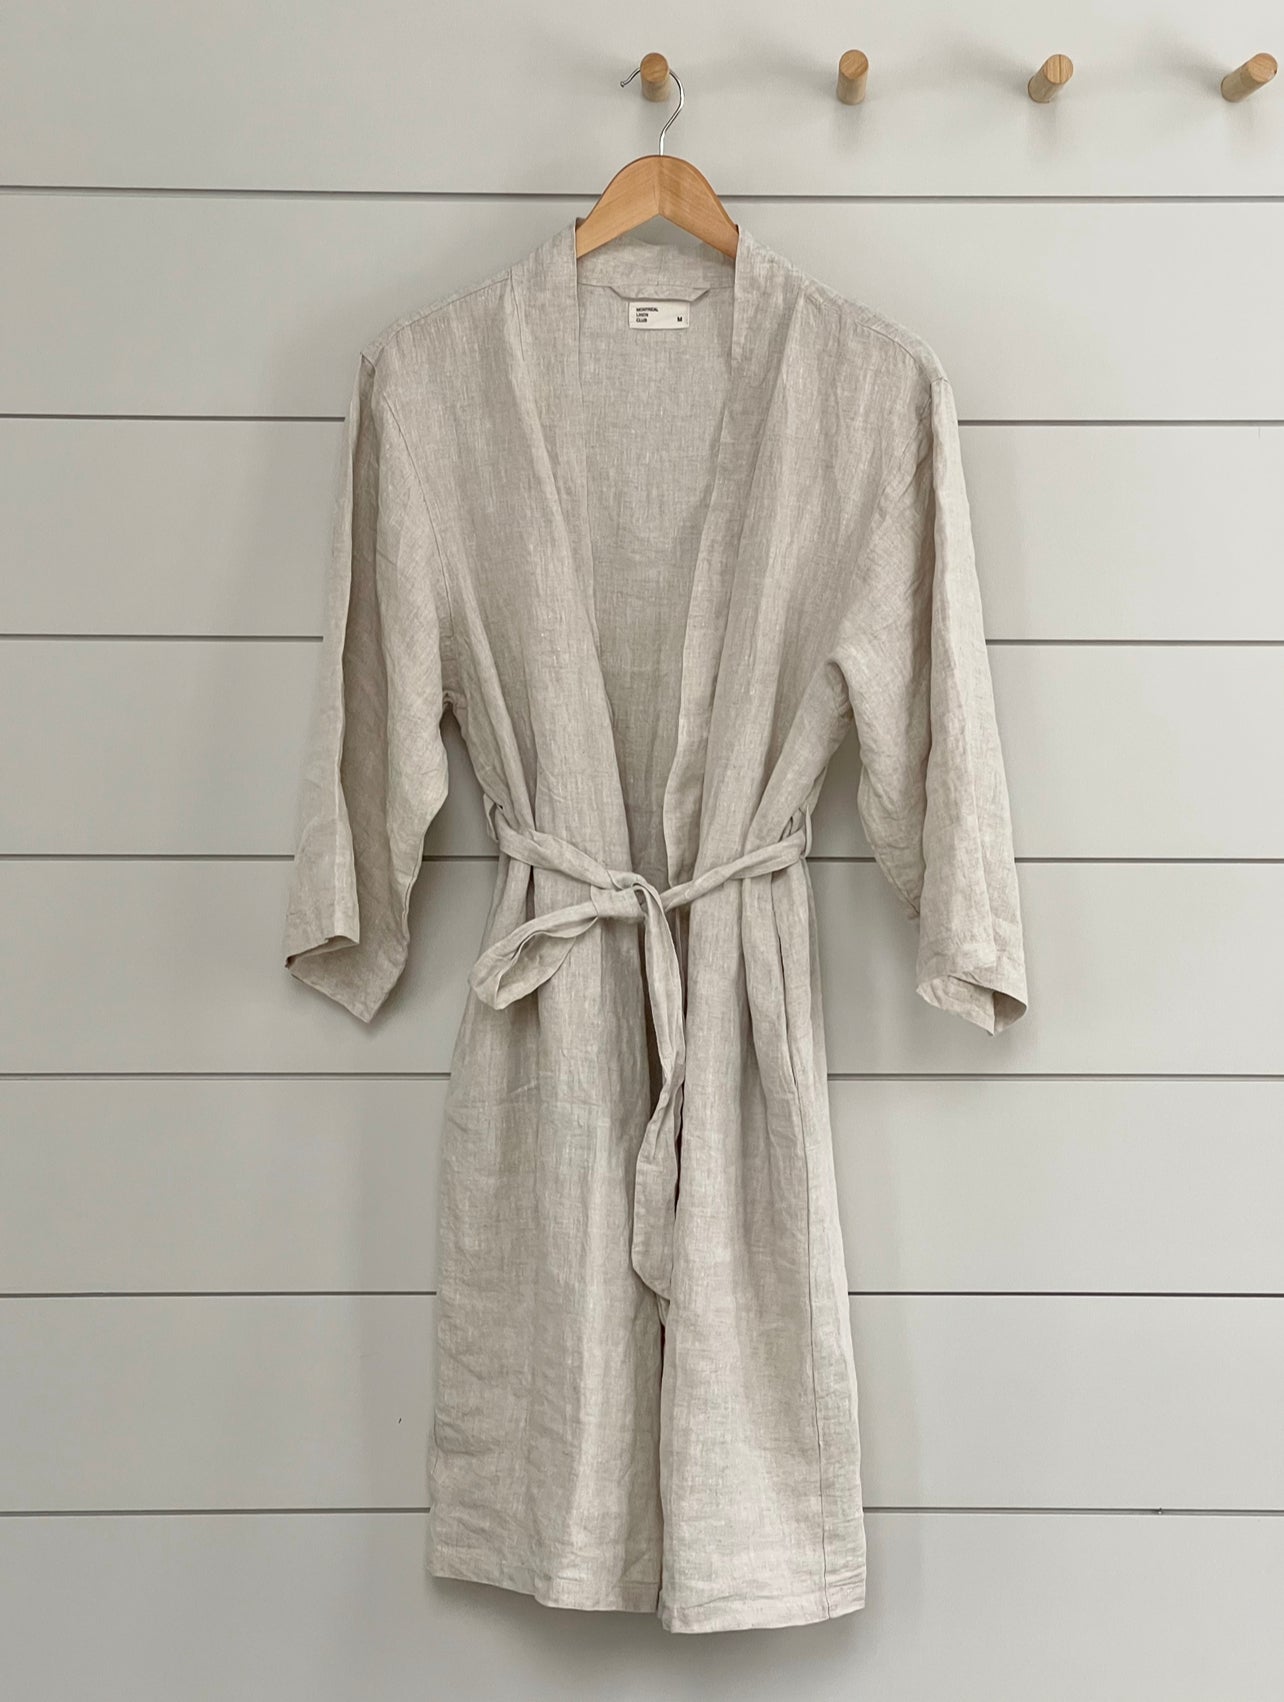 STONEWASH 100% FRENCH FLAX LINEN CLASSIC BATHROBE women-accessories onesky Natural SMALL IN STOCK